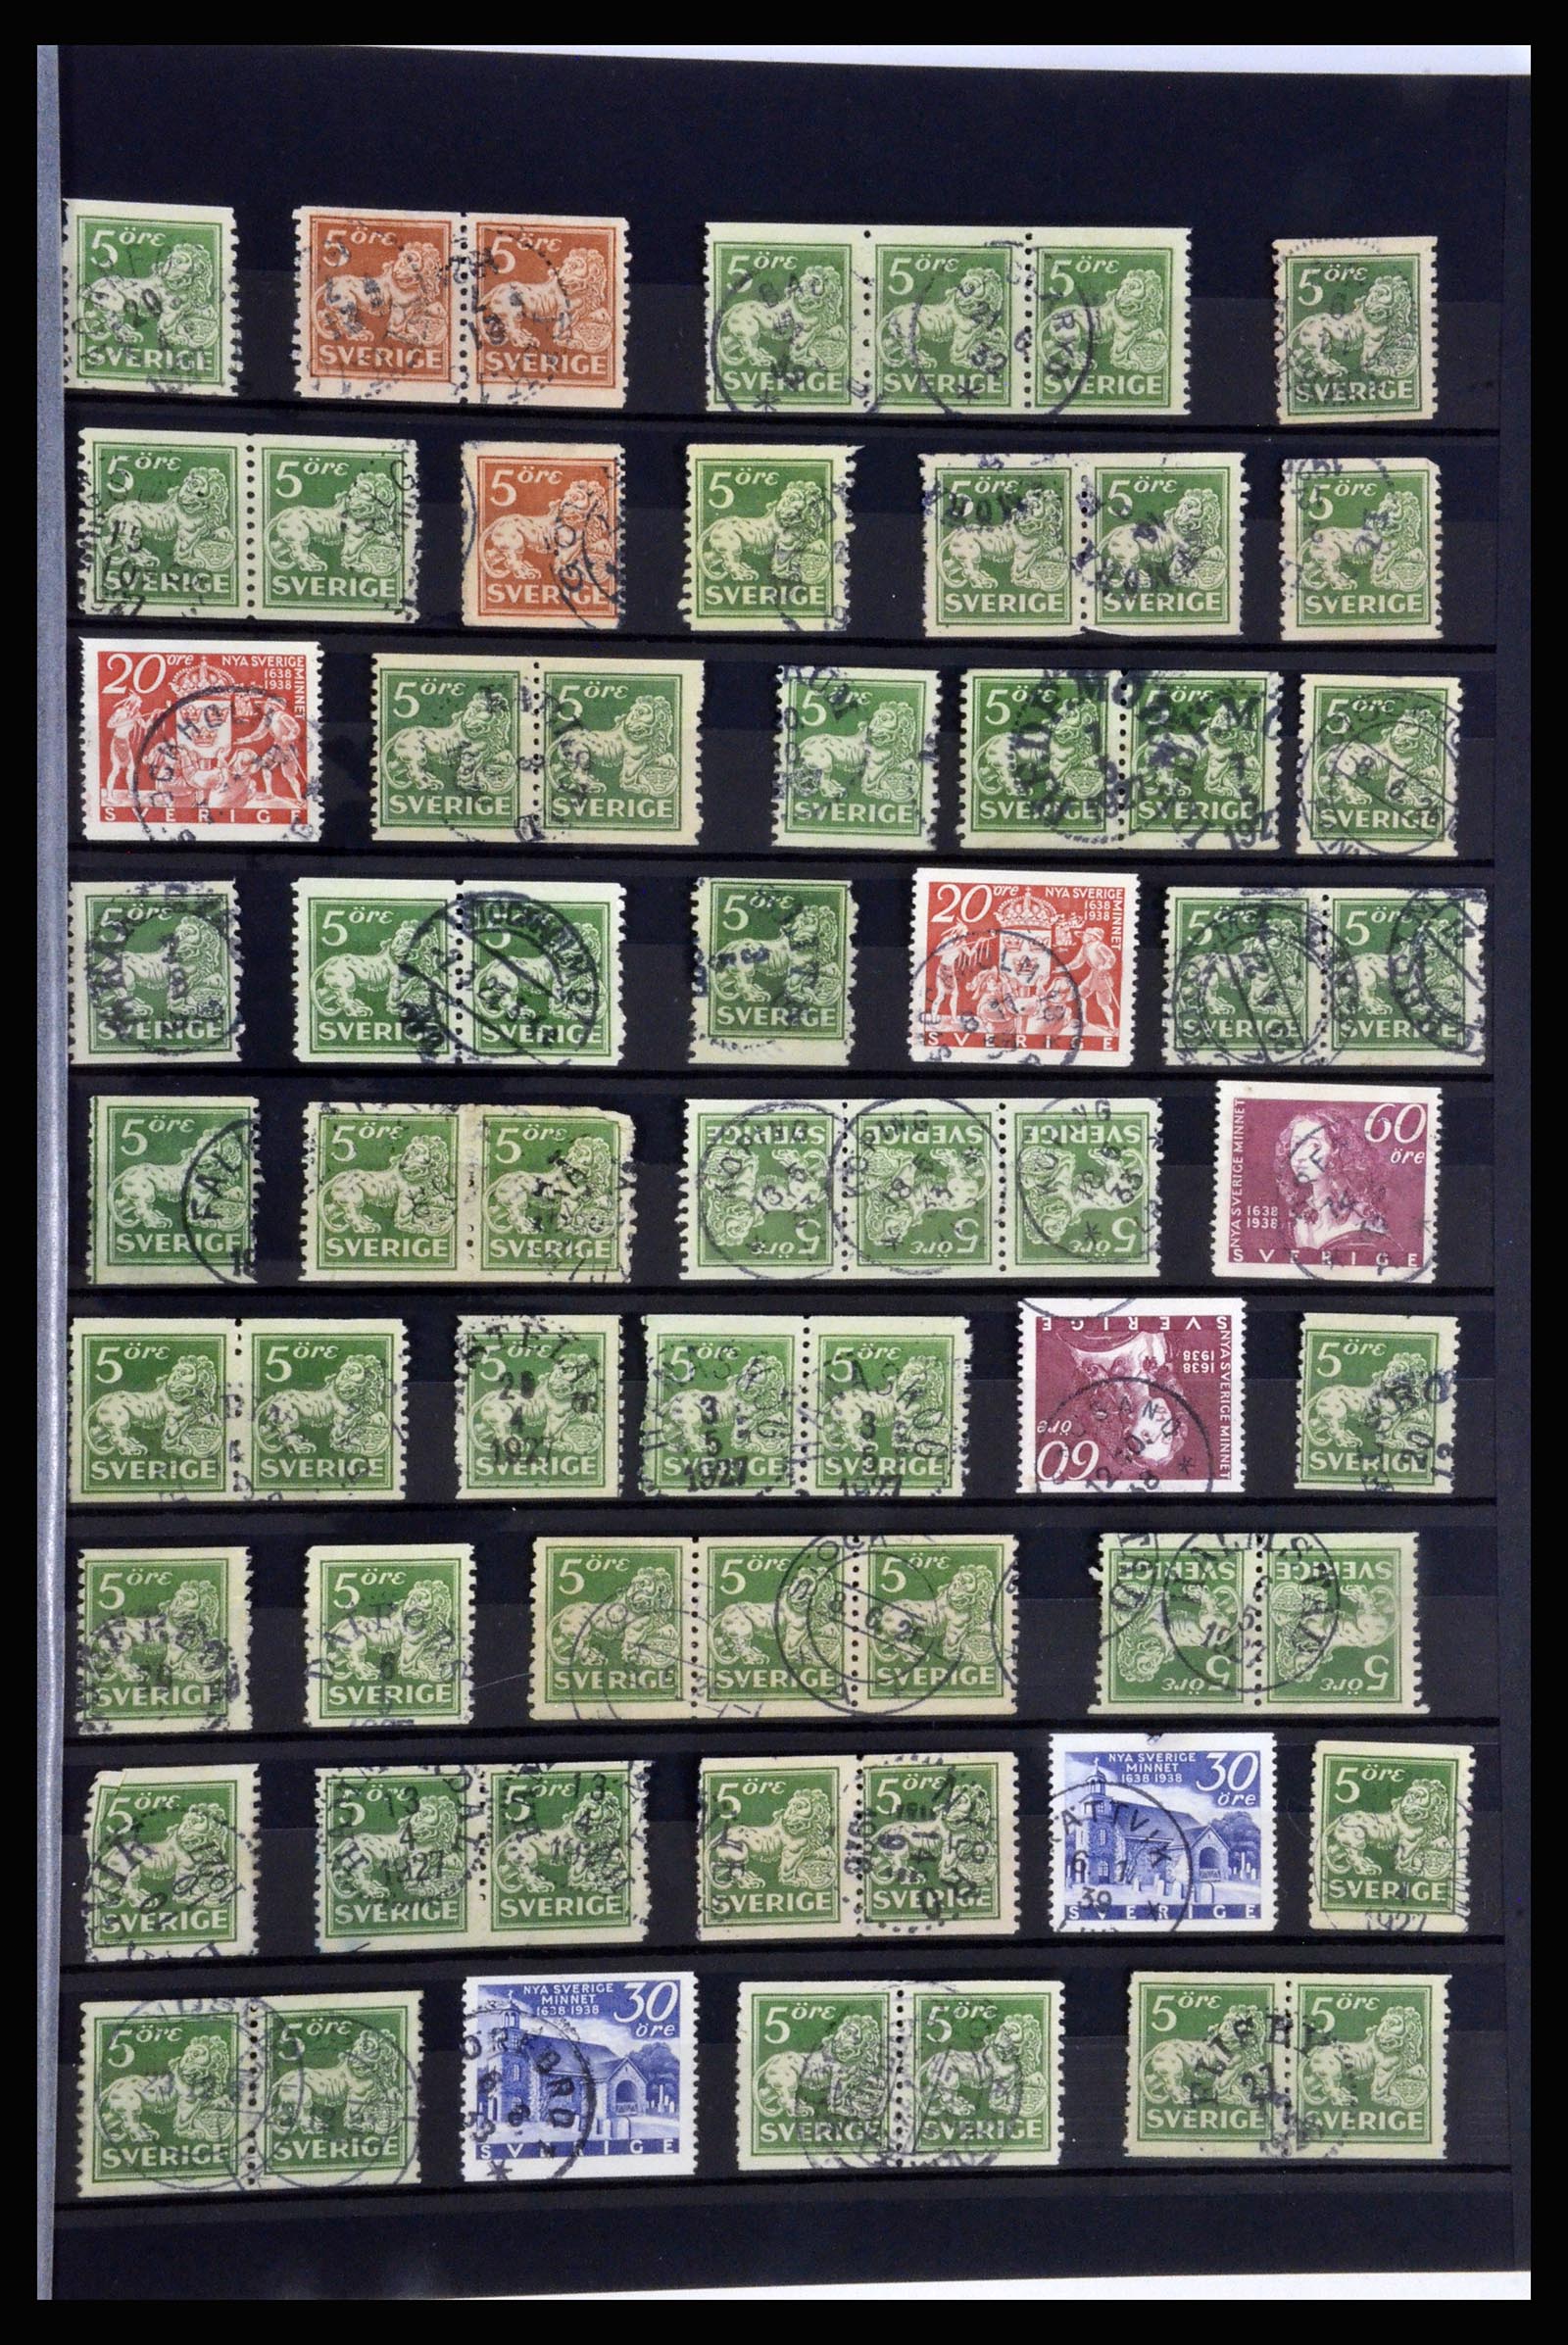 36316 023 - Stamp collection 36316 Sweden cancellations 1920-1938.